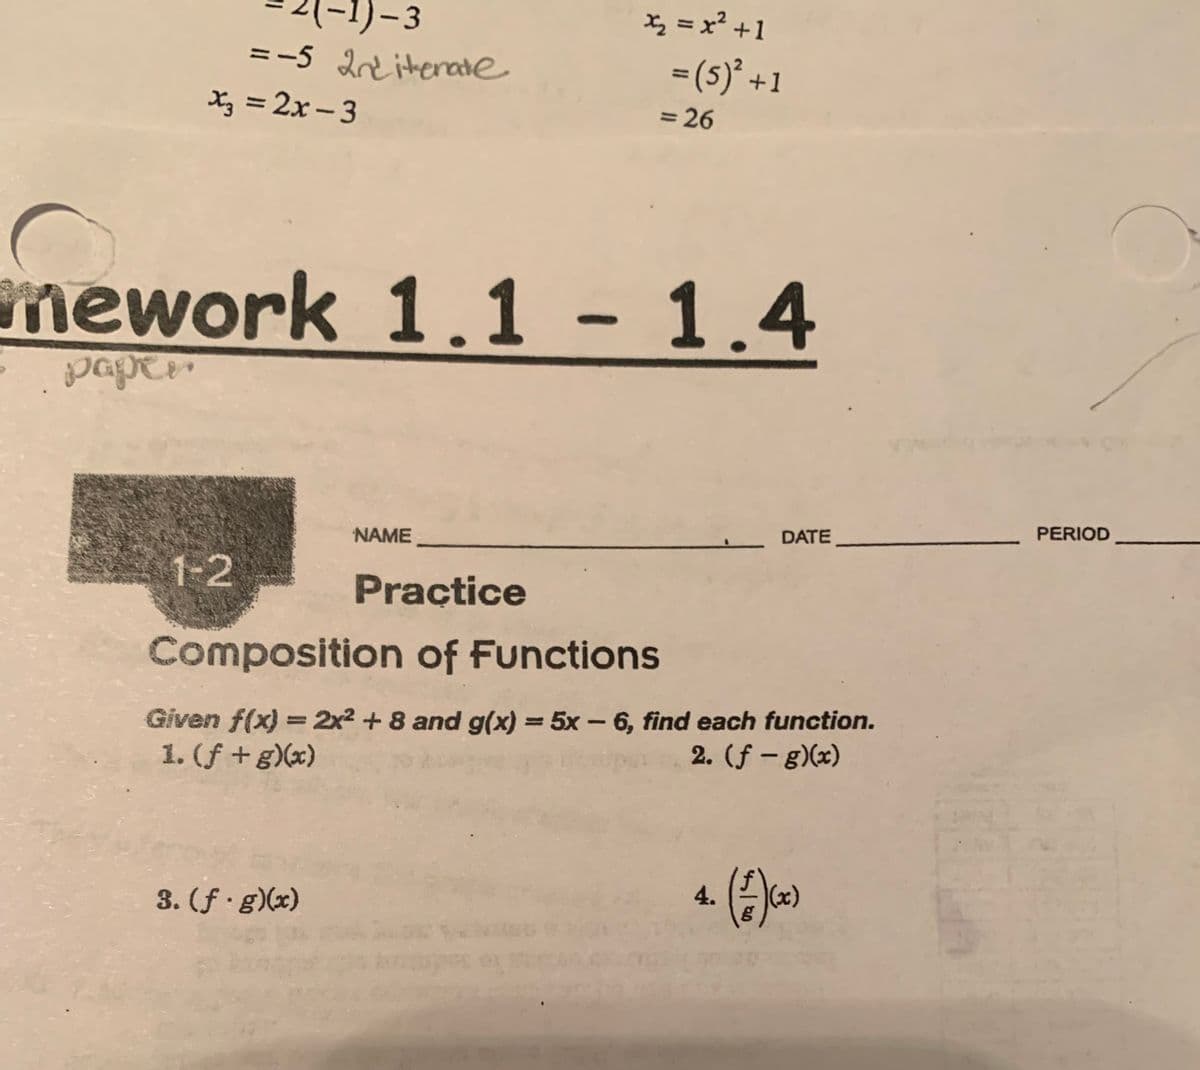 -1)-3
= -5 2nd iterate
x3 =2x-3
1-2
mework 1.1 - 1.4
paper
x₂ = x² +1
NAME
Practice
Composition of Functions
3. (f g)(x)
= (5)² +1
= 26
.DATE_
Given f(x) = 2x² + 8 and g(x) = 5x - 6, find each function.
1. (f + g)(x)
2. (ƒ - g)(x)
4. (A)(x)
3
PERIOD